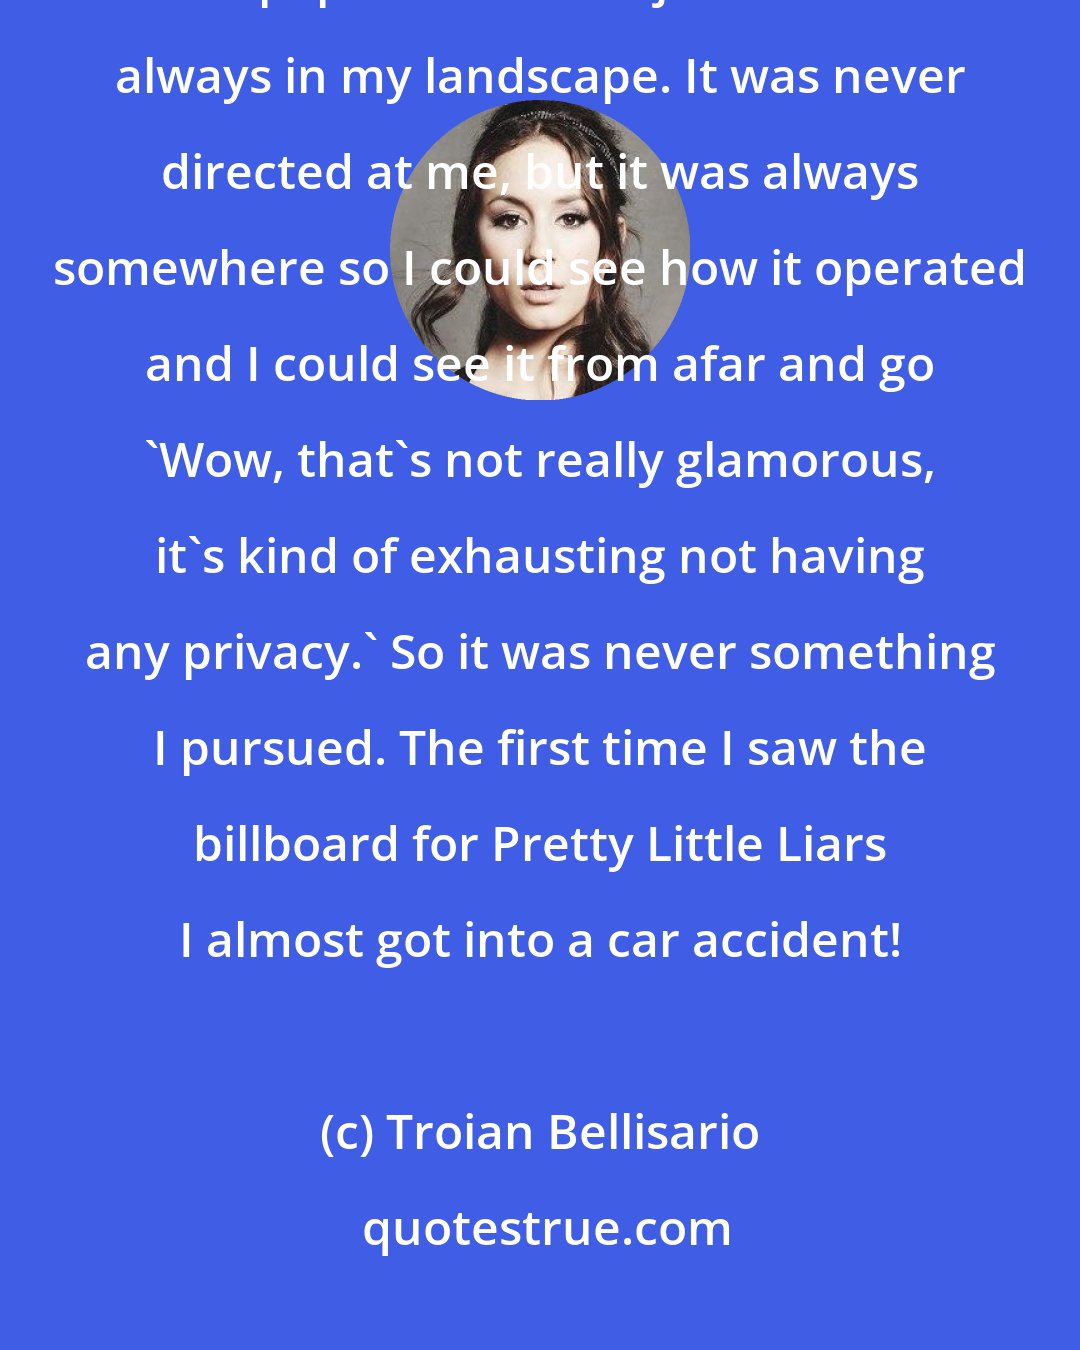 Troian Bellisario: Even when I was young I wanted to be an actress. I knew the actors and the paparazzi. It was just kind of always in my landscape. It was never directed at me, but it was always somewhere so I could see how it operated and I could see it from afar and go 'Wow, that's not really glamorous, it's kind of exhausting not having any privacy.' So it was never something I pursued. The first time I saw the billboard for Pretty Little Liars I almost got into a car accident!